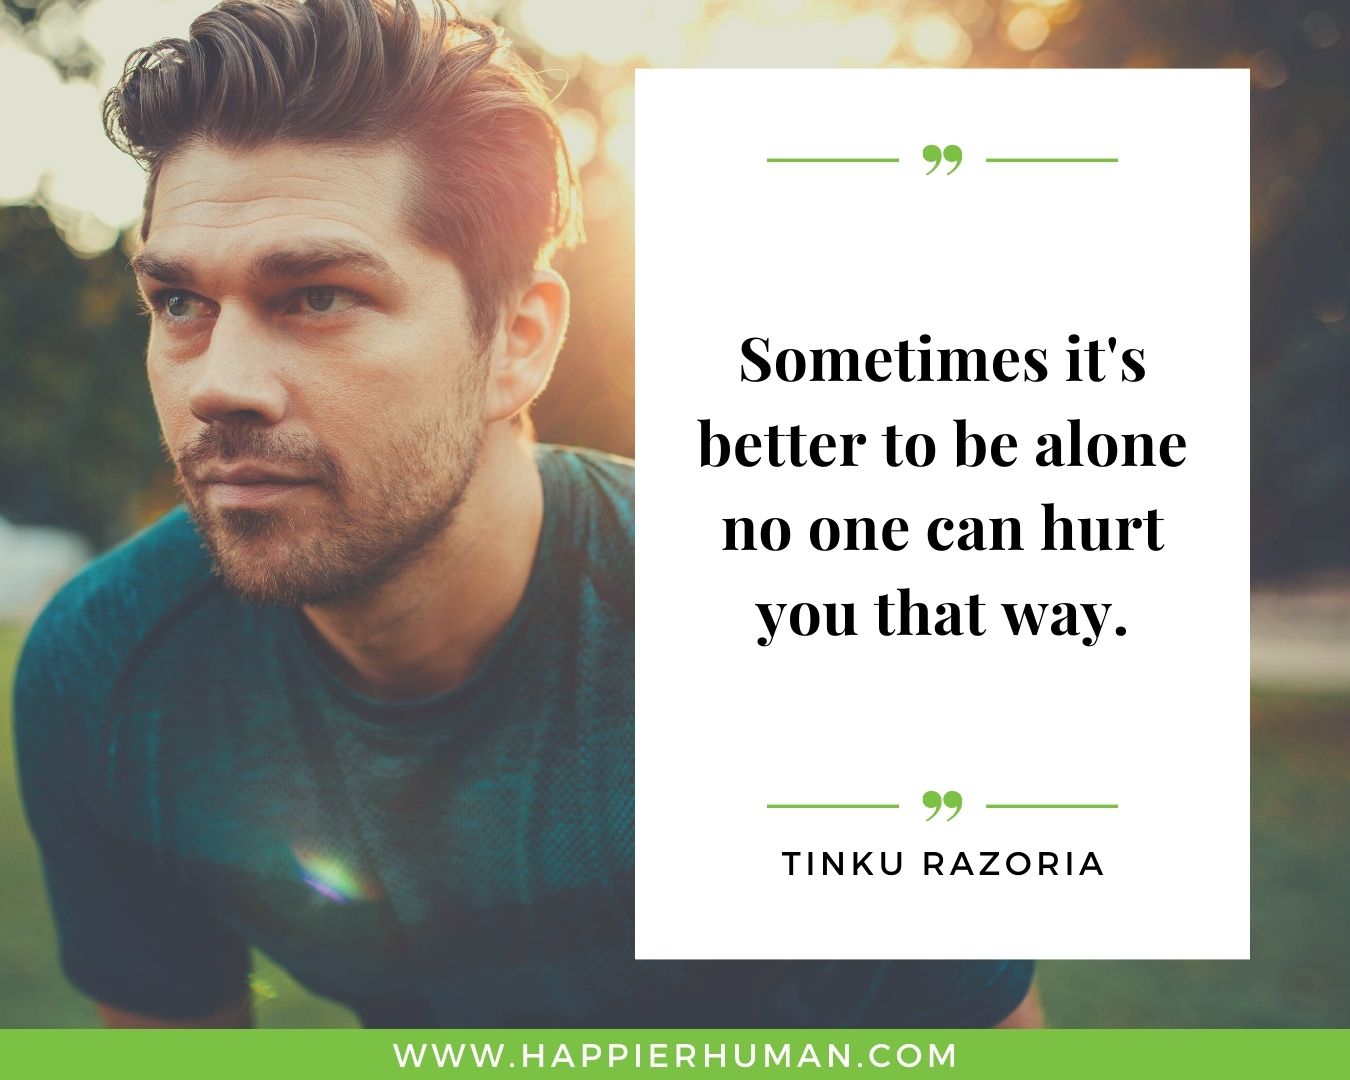 Loneliness Quotes - “Sometimes it's better to be alone no one can hurt you that way.”– Tinku Razoria